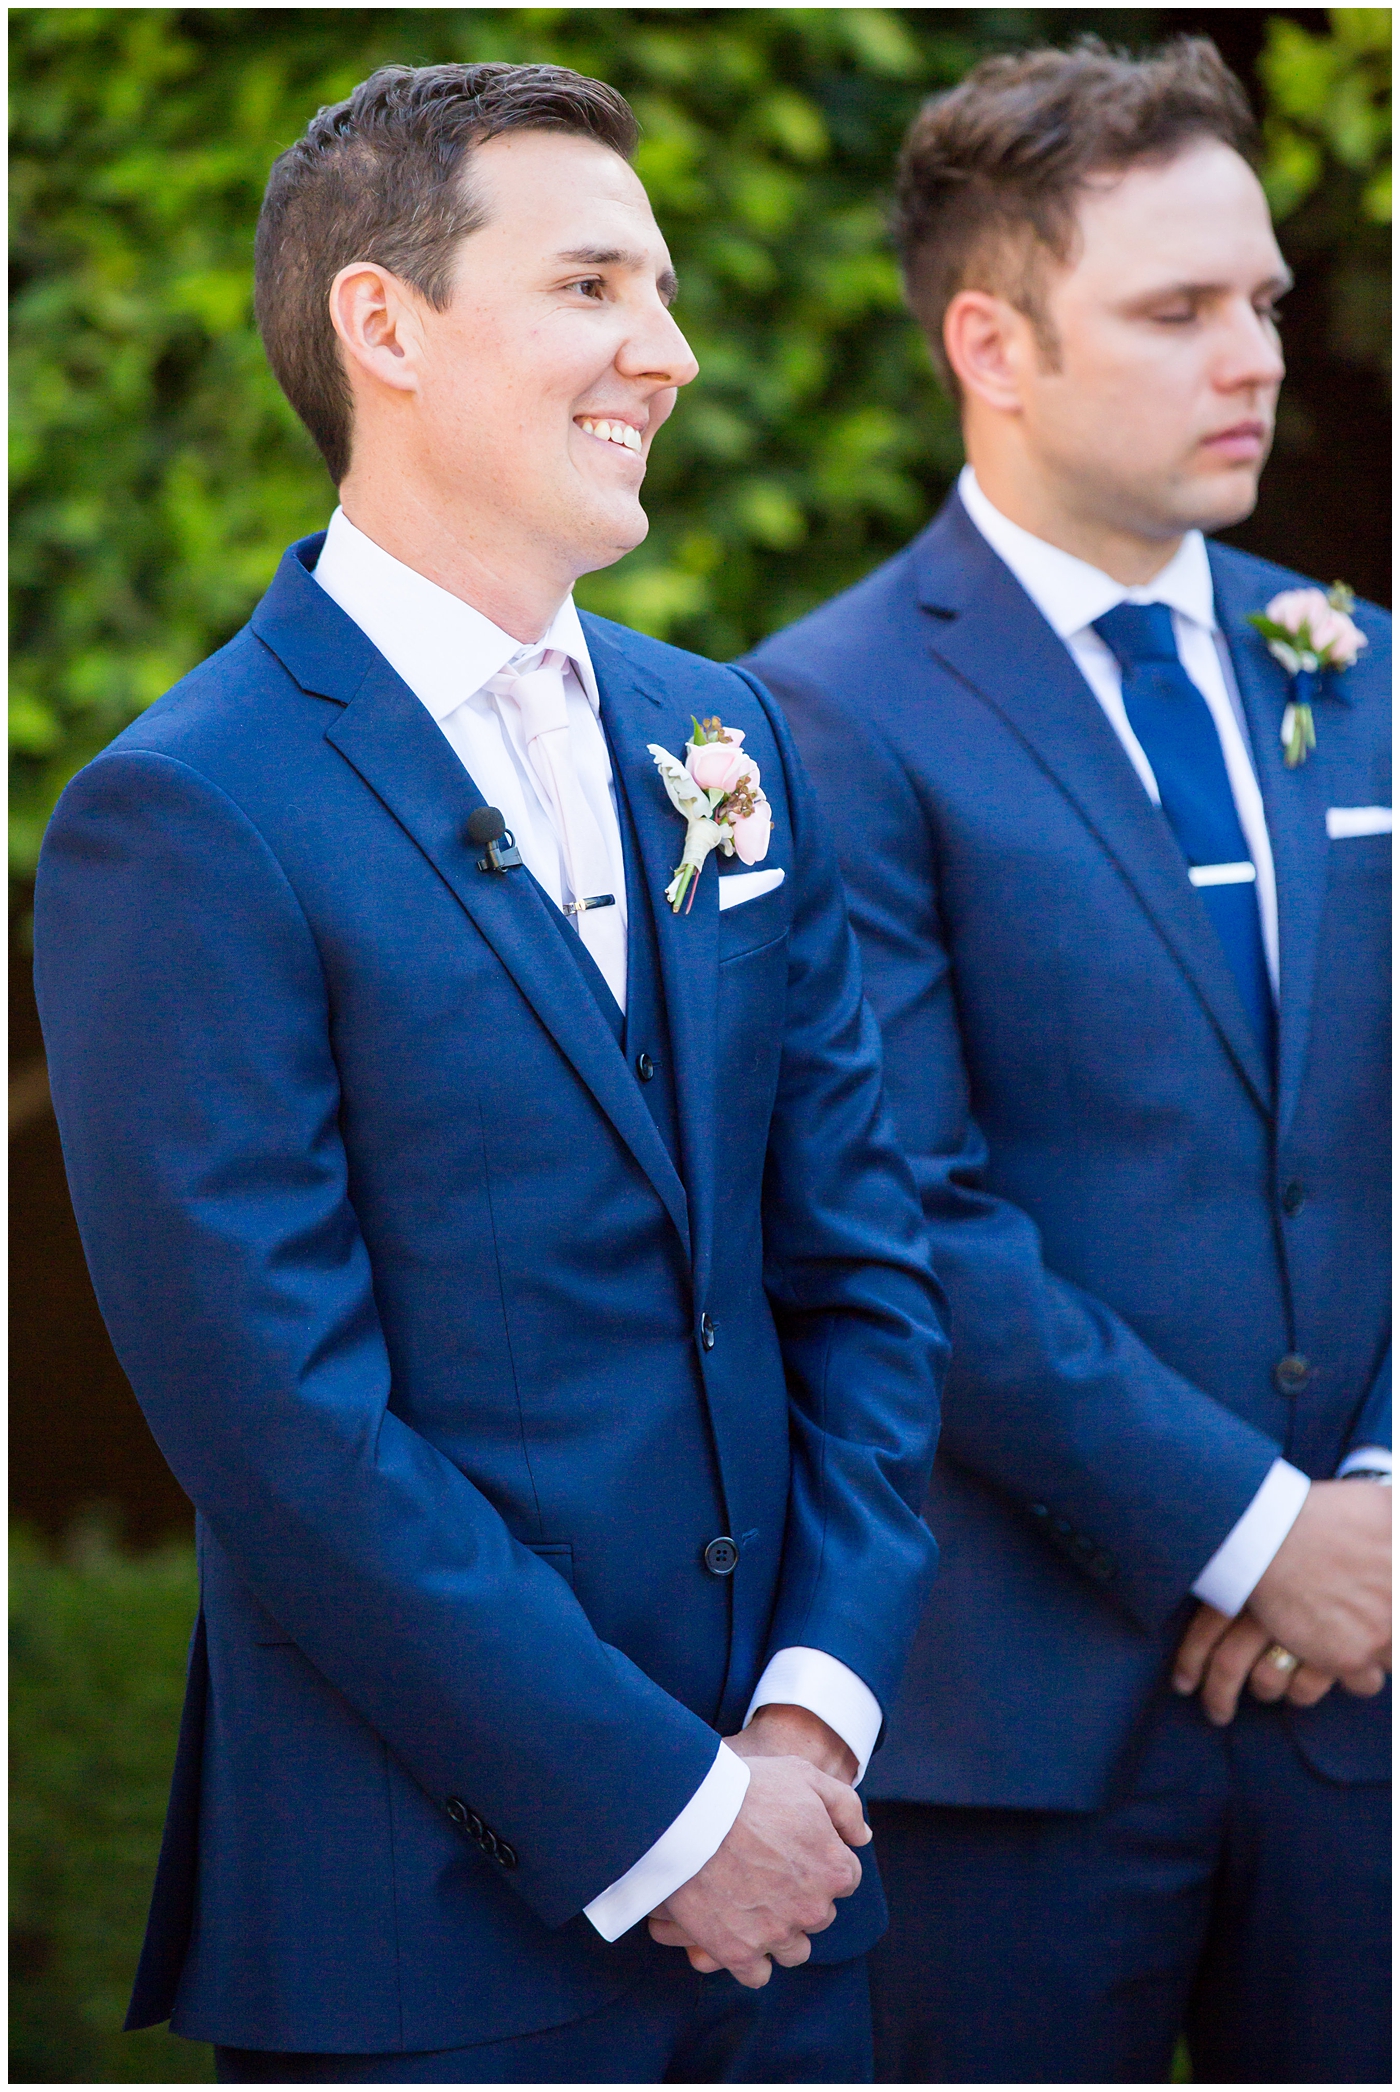 groom in blue suit with blush rose boutonniere seeing bride walk down outdoor wedding aisle